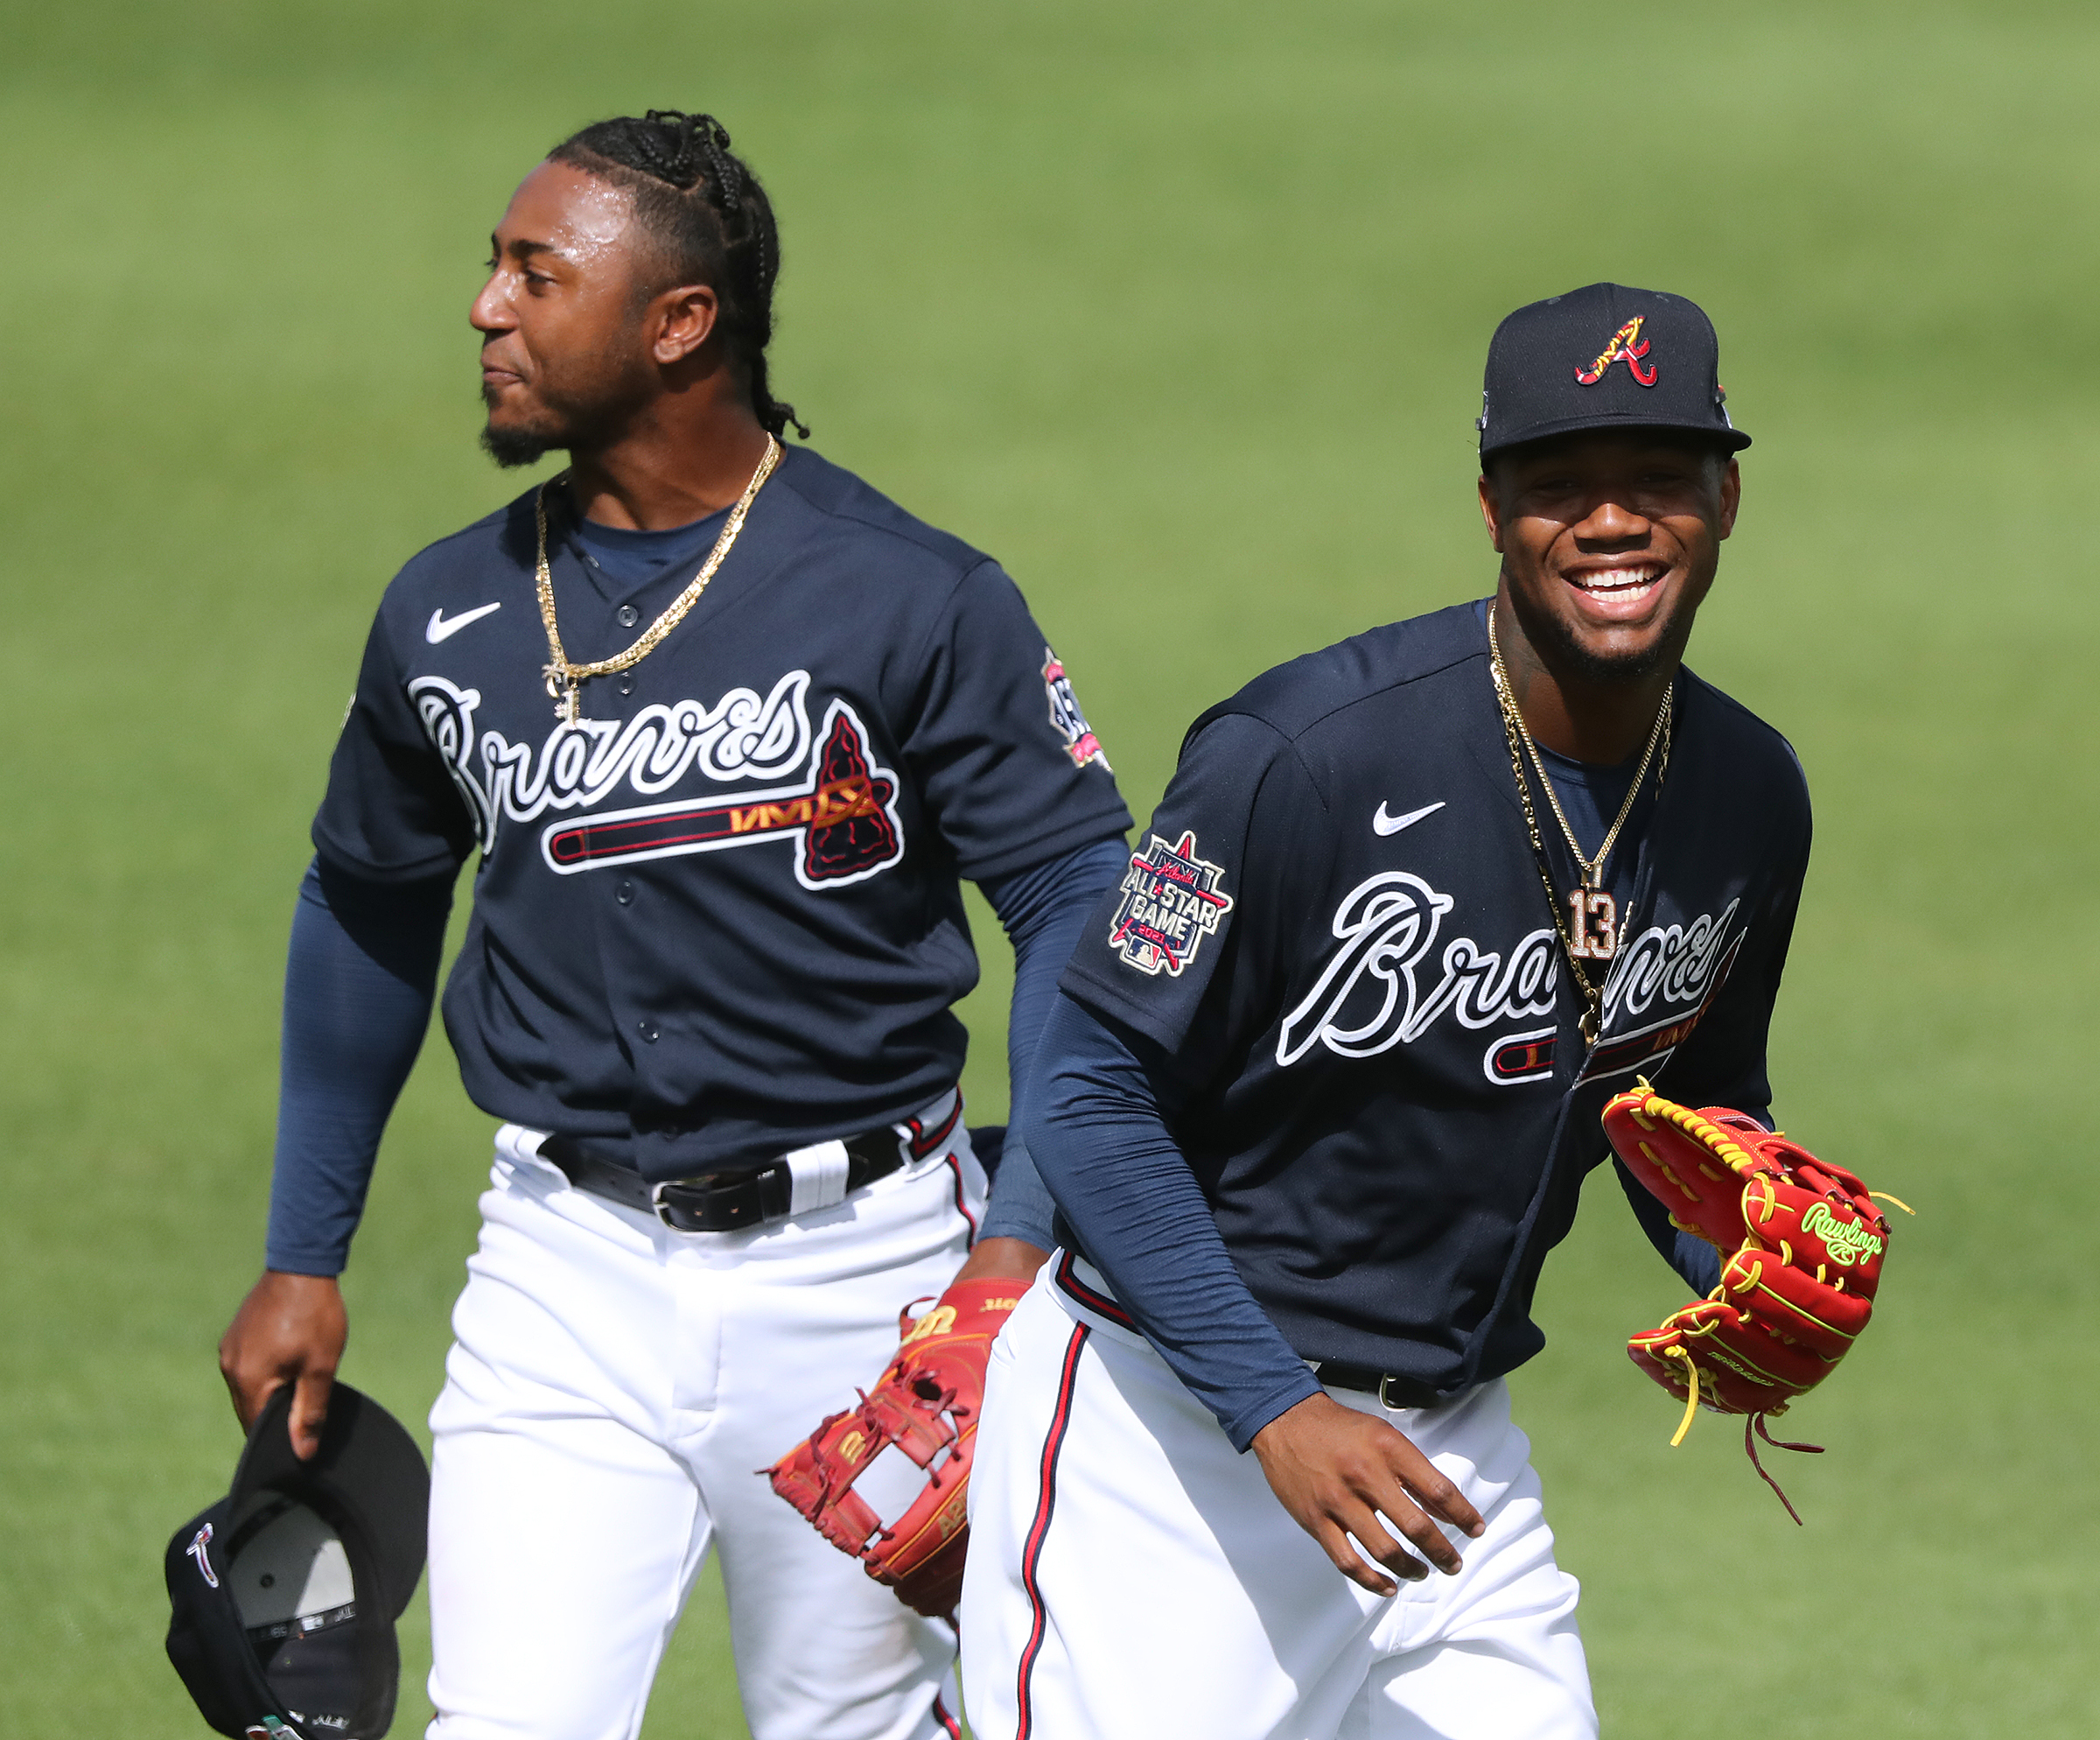 M-BRAVES ANNOUNCE OPENING DAY ROSTER: Roster features 17 newcomers